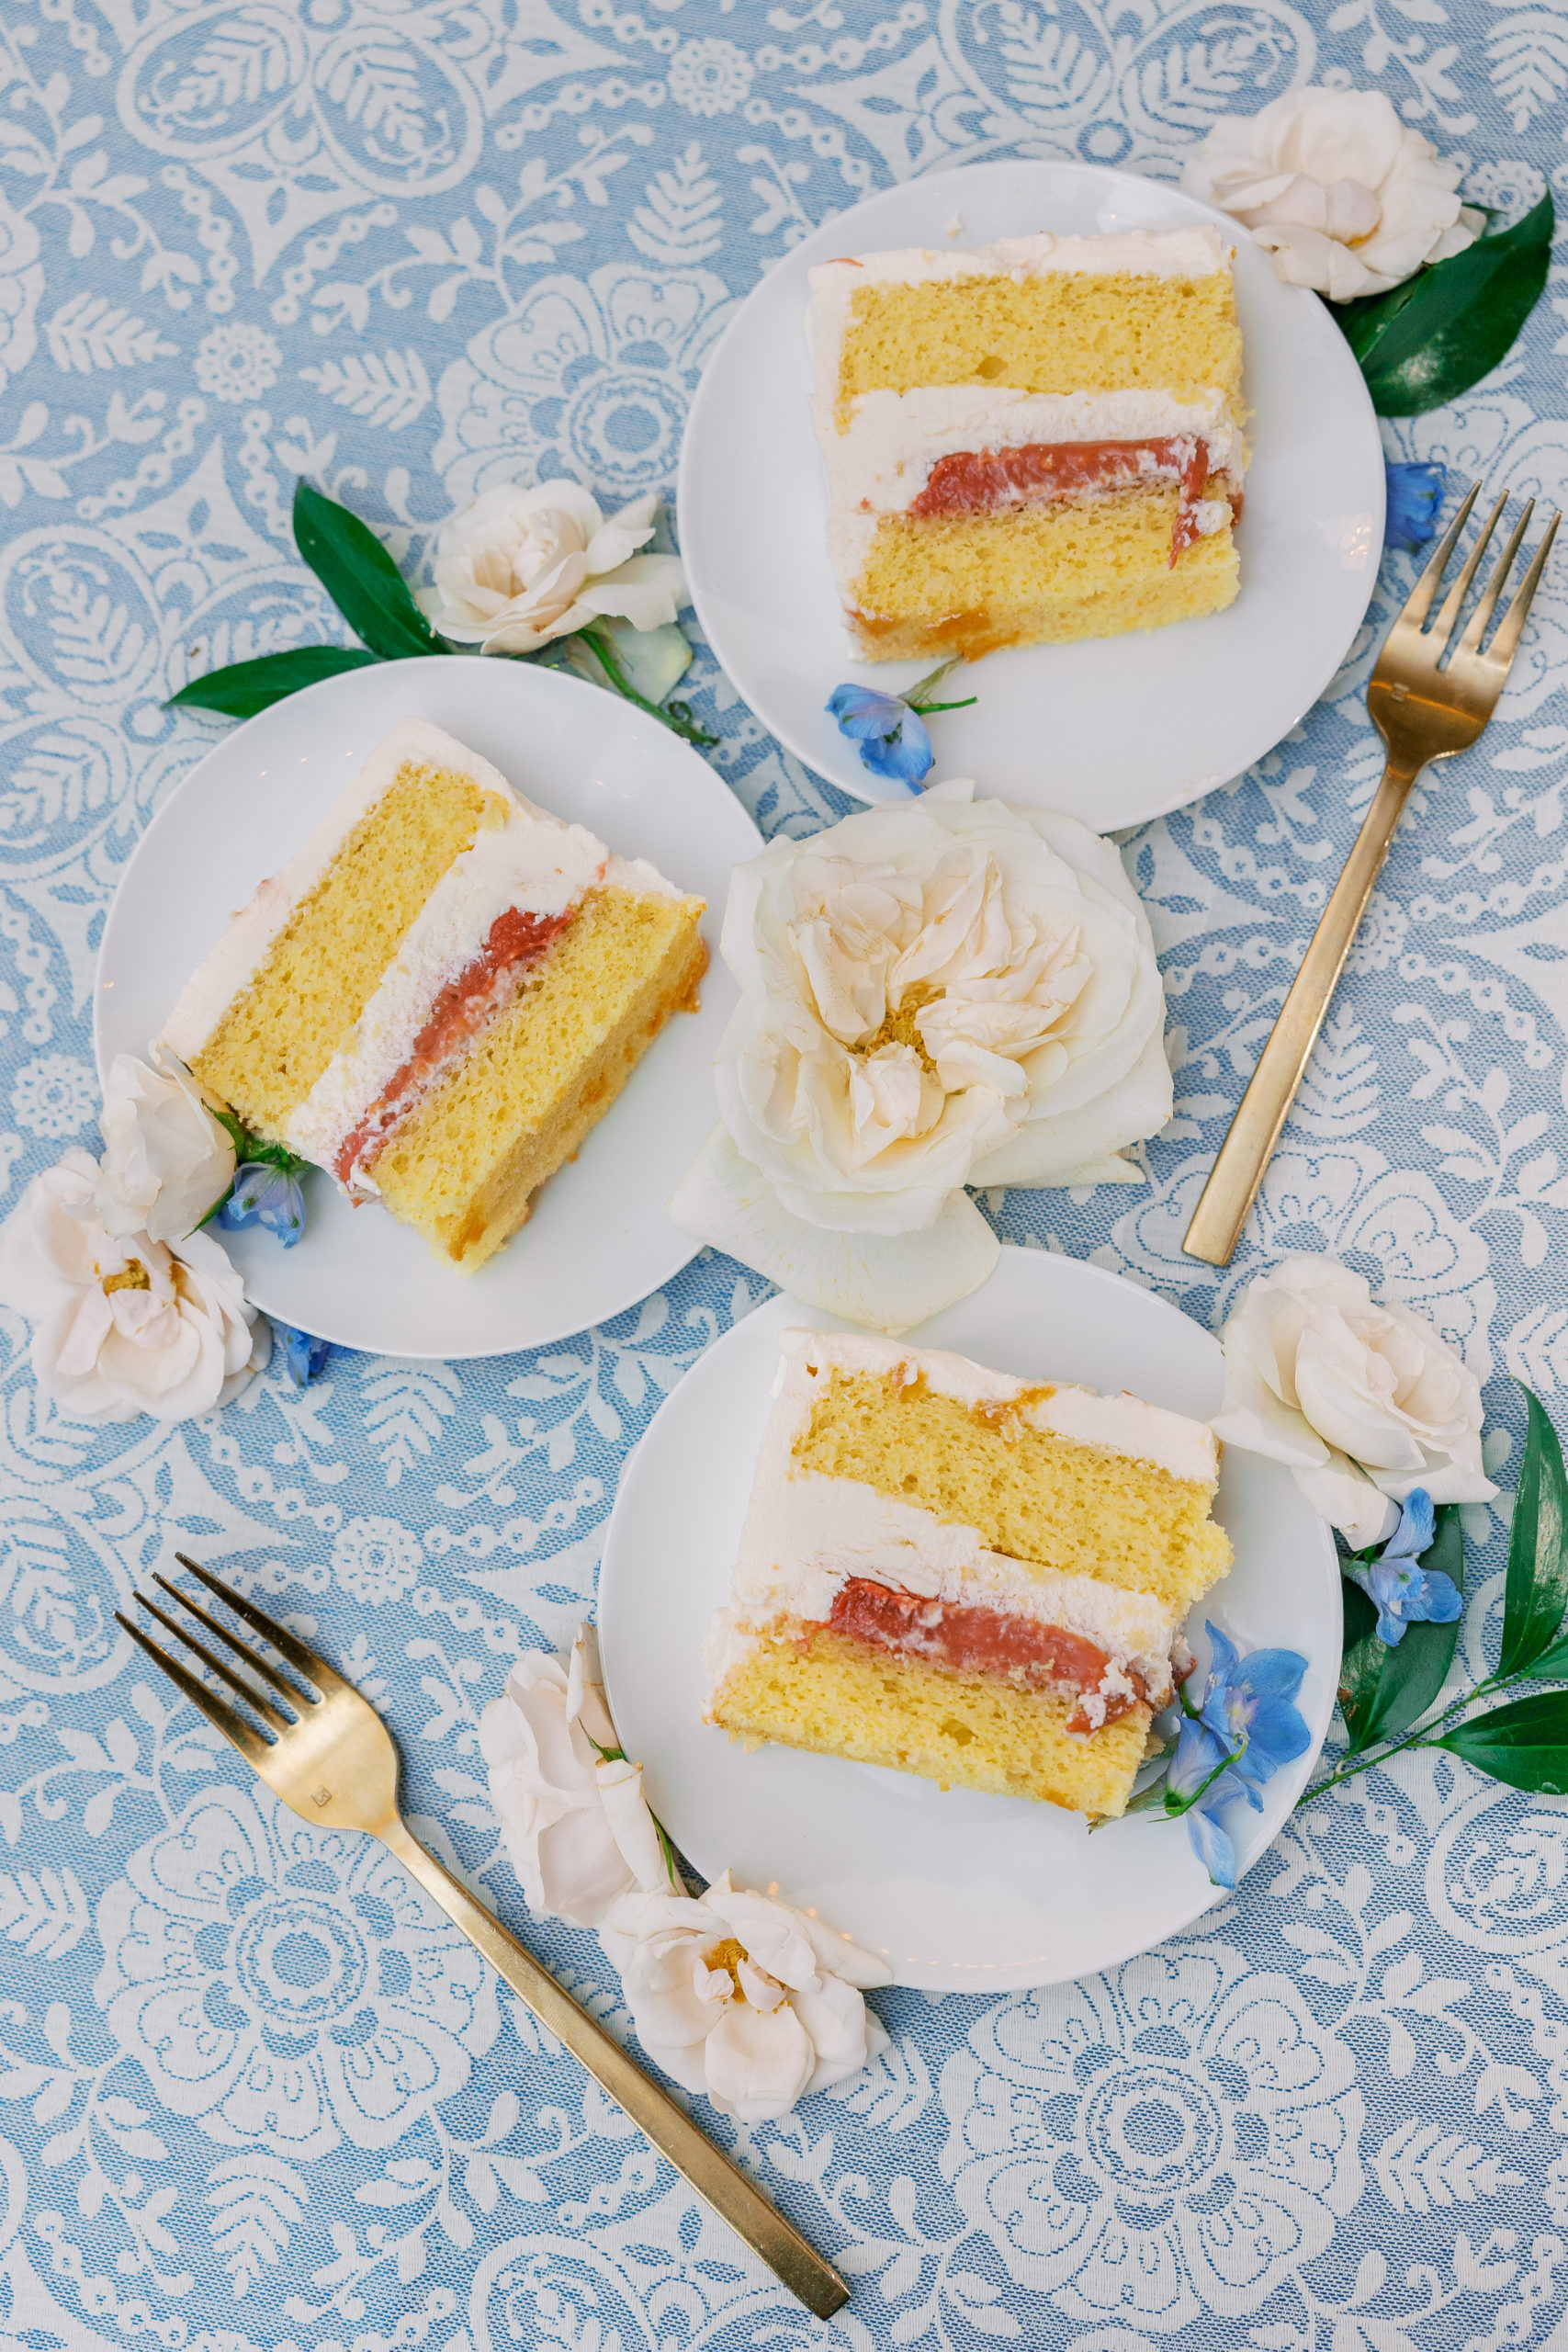 Slices of wedding cake with cream and fruit inside for Charlottesville Wedding Photography
